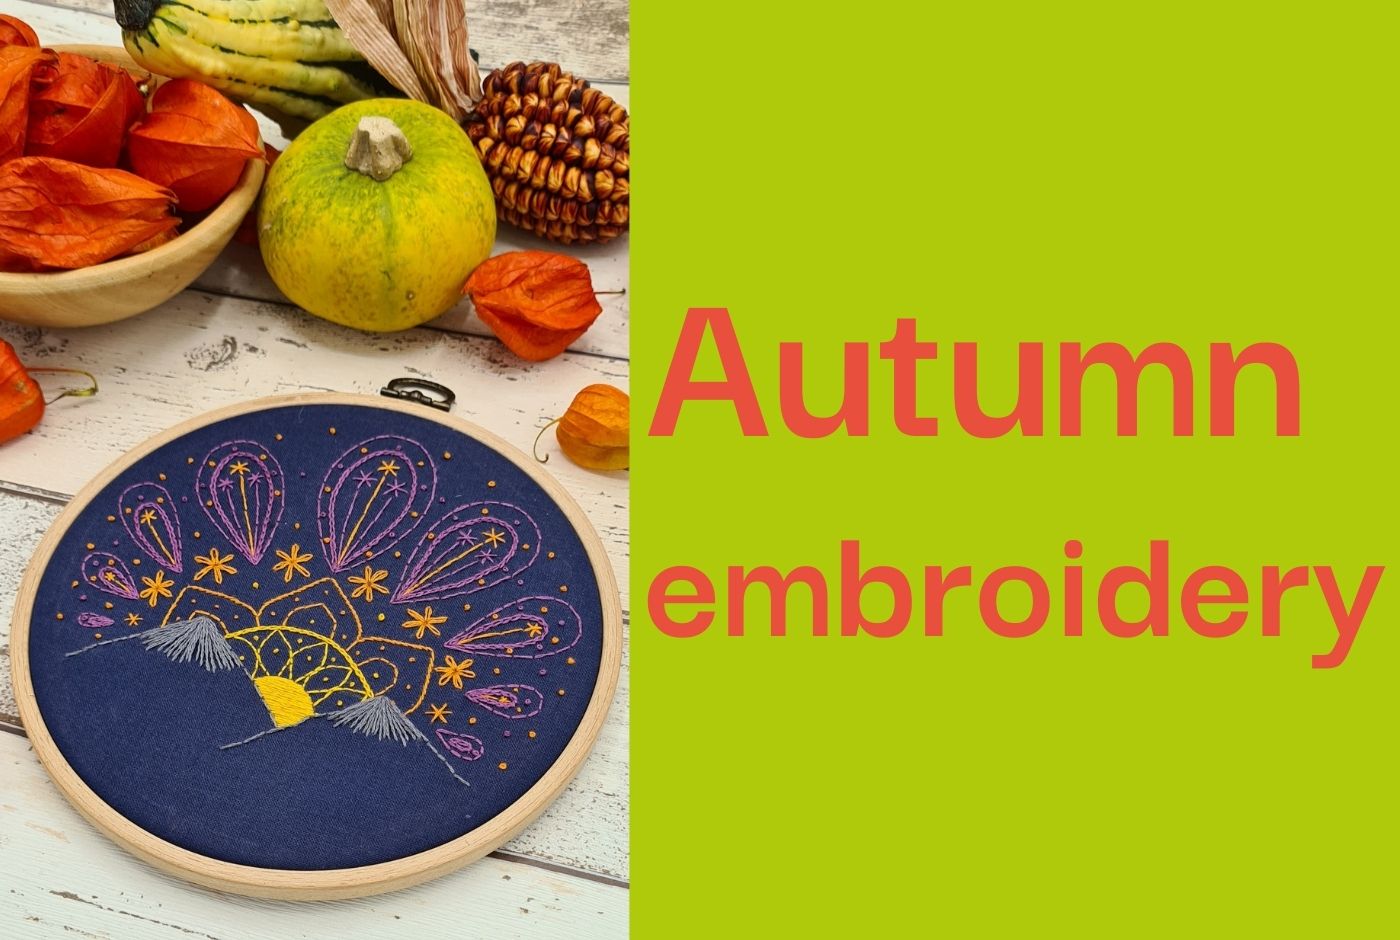 A photo of a paisley sunset embroidery hoop with autumnal decorations.